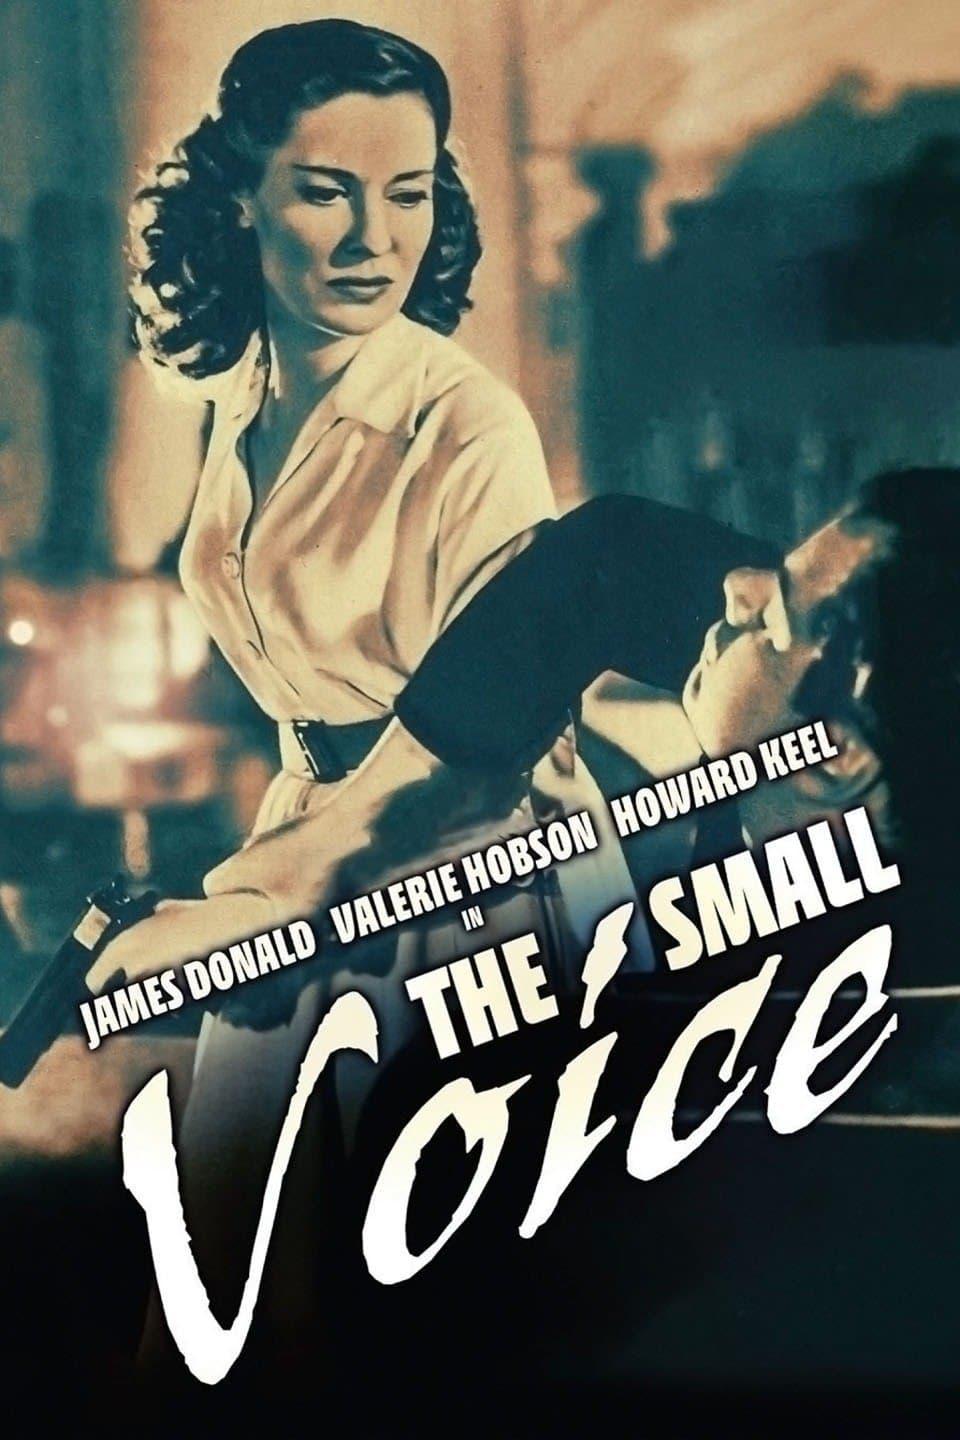 The Small Voice poster